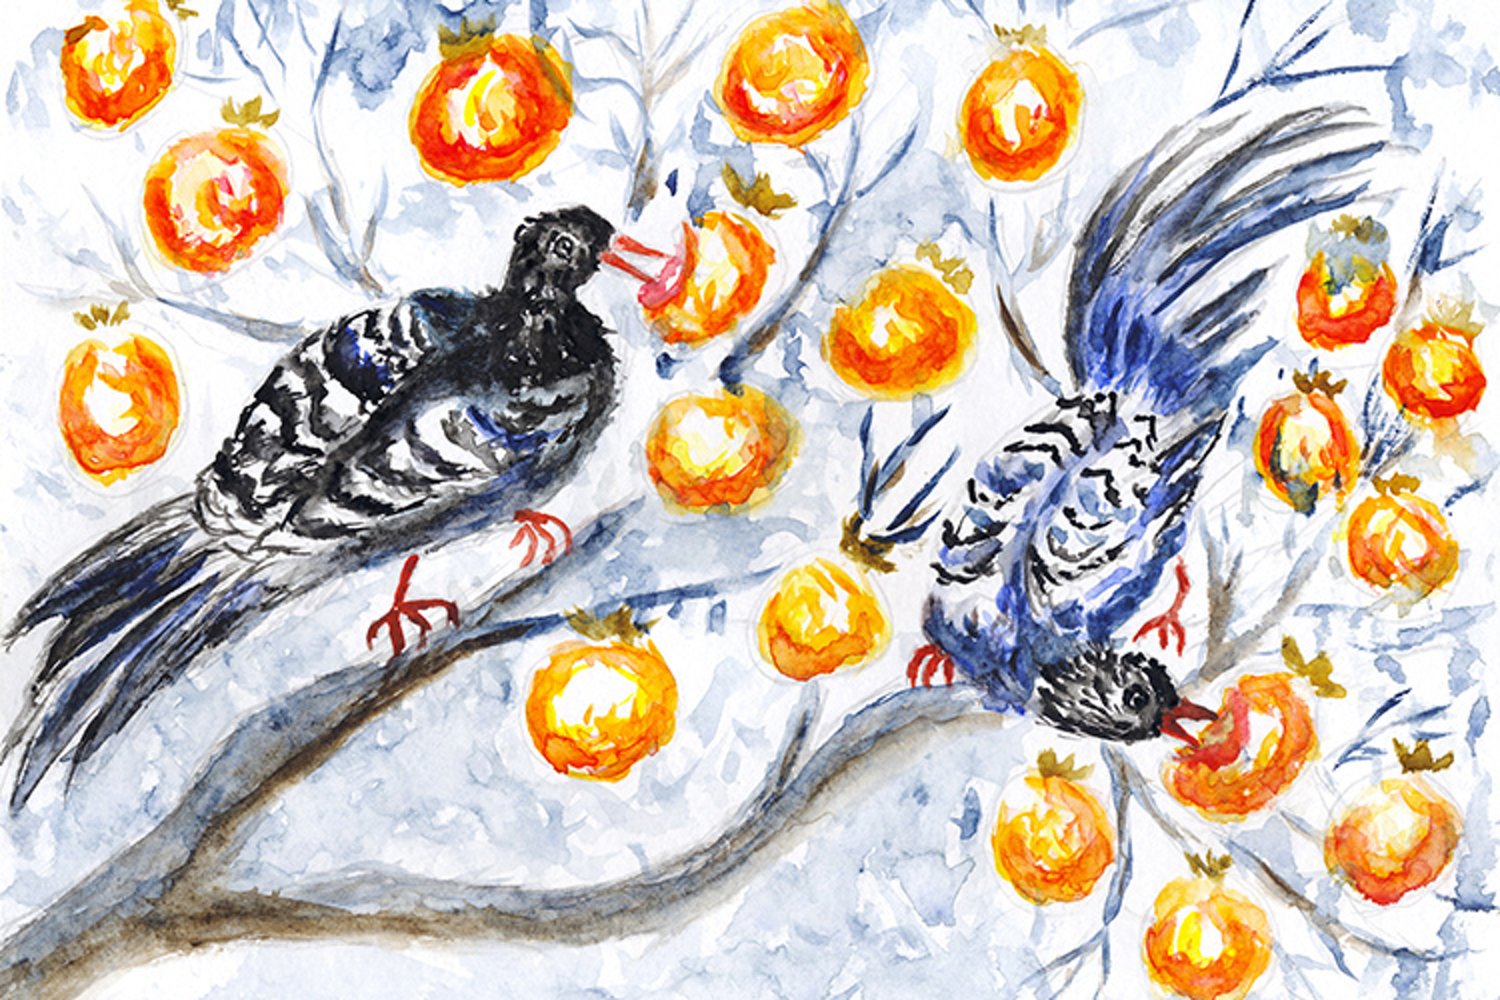 Cover image of Persimmon and magpie drawing.